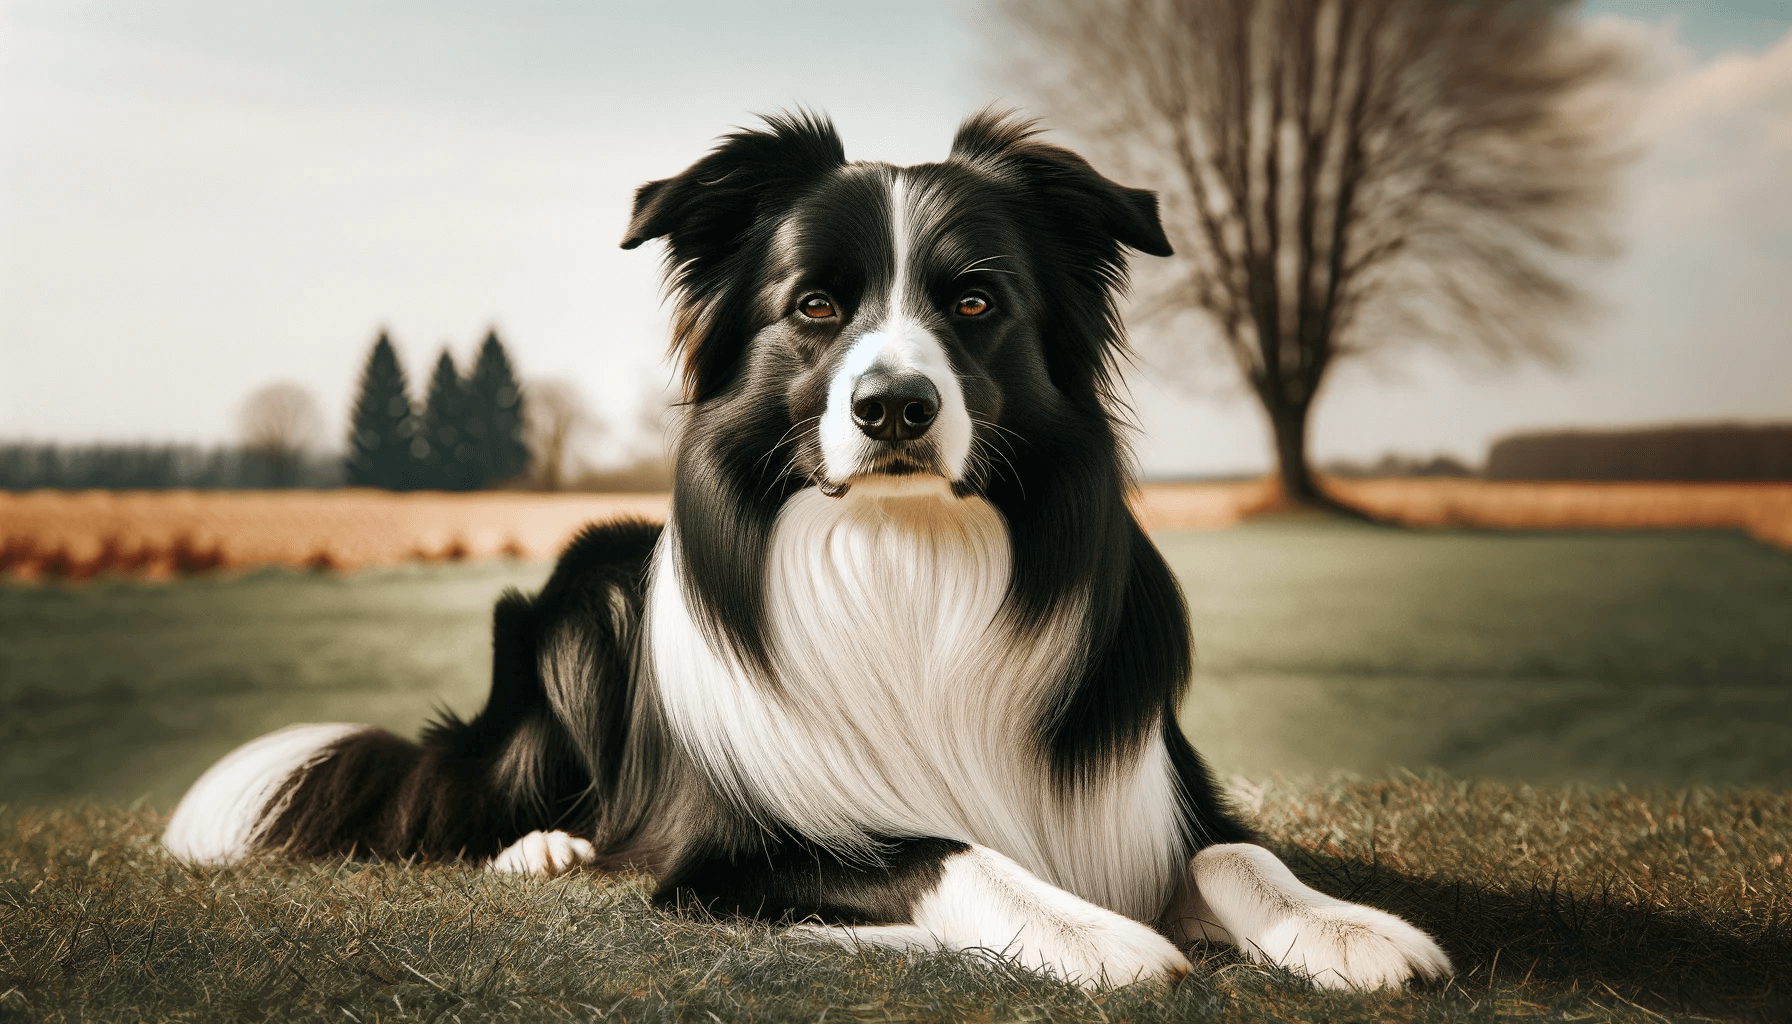 Smooth Coat Border Collie with a calm and confident expression lying on a grassy field.